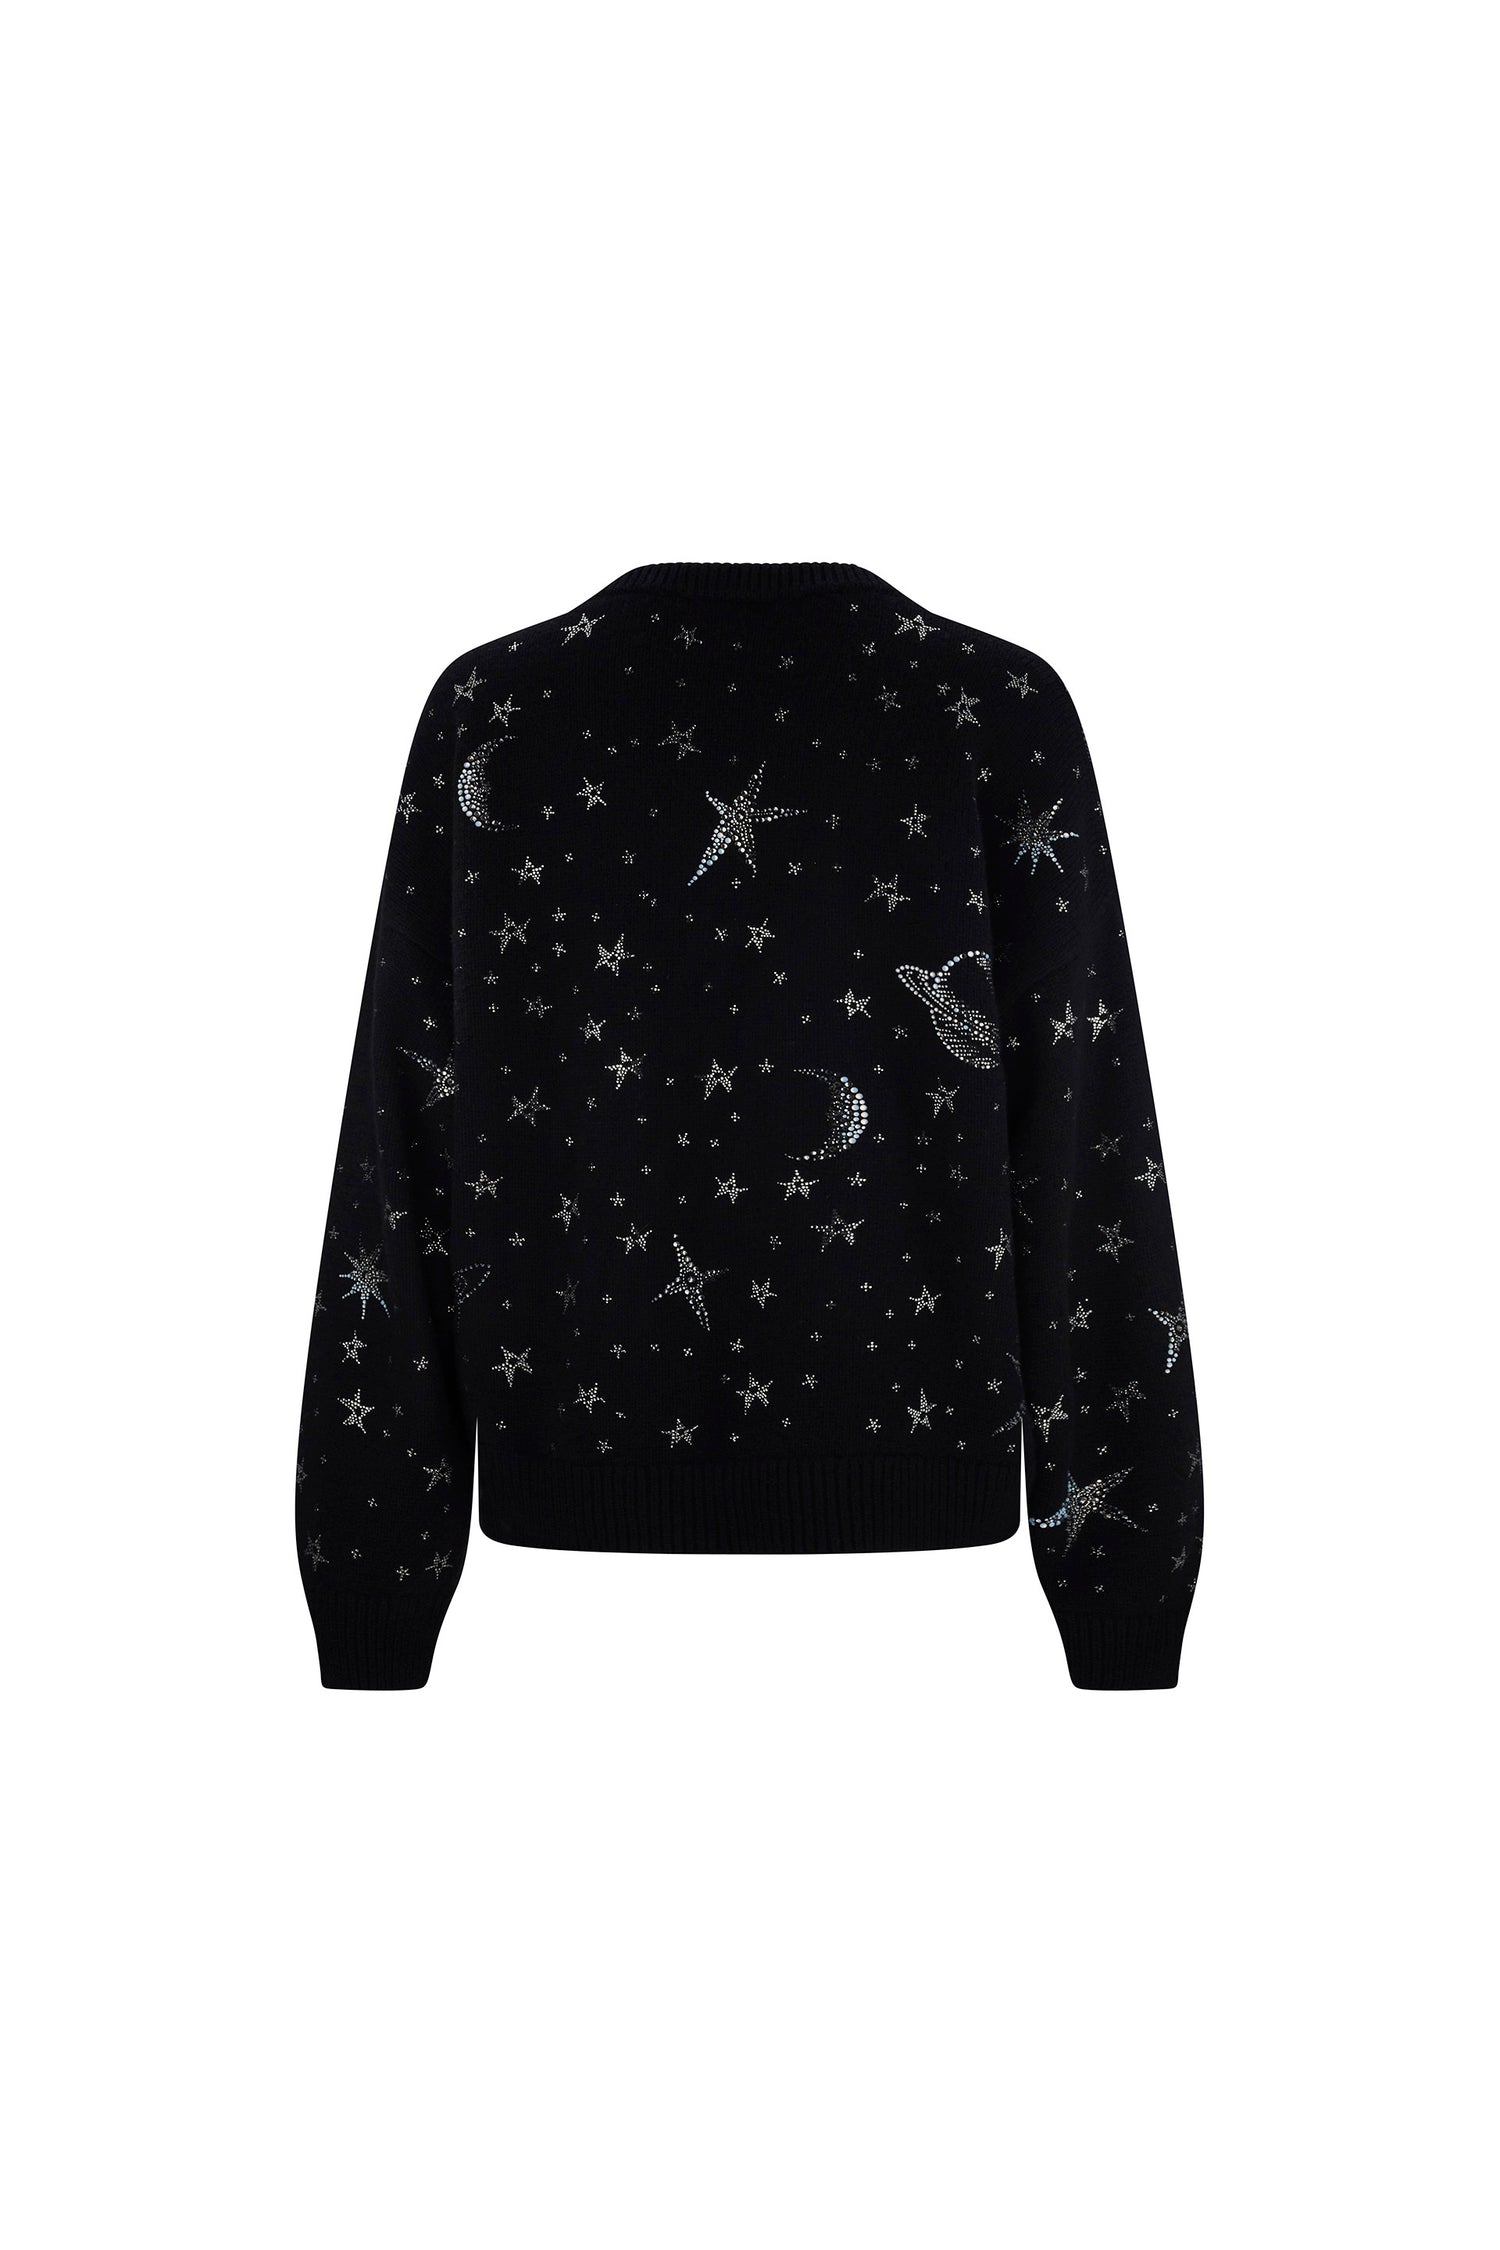 'HERE, THERE, AND EVERYWHERE' SHORTIE V-NECK SWEATER -  - Libertine